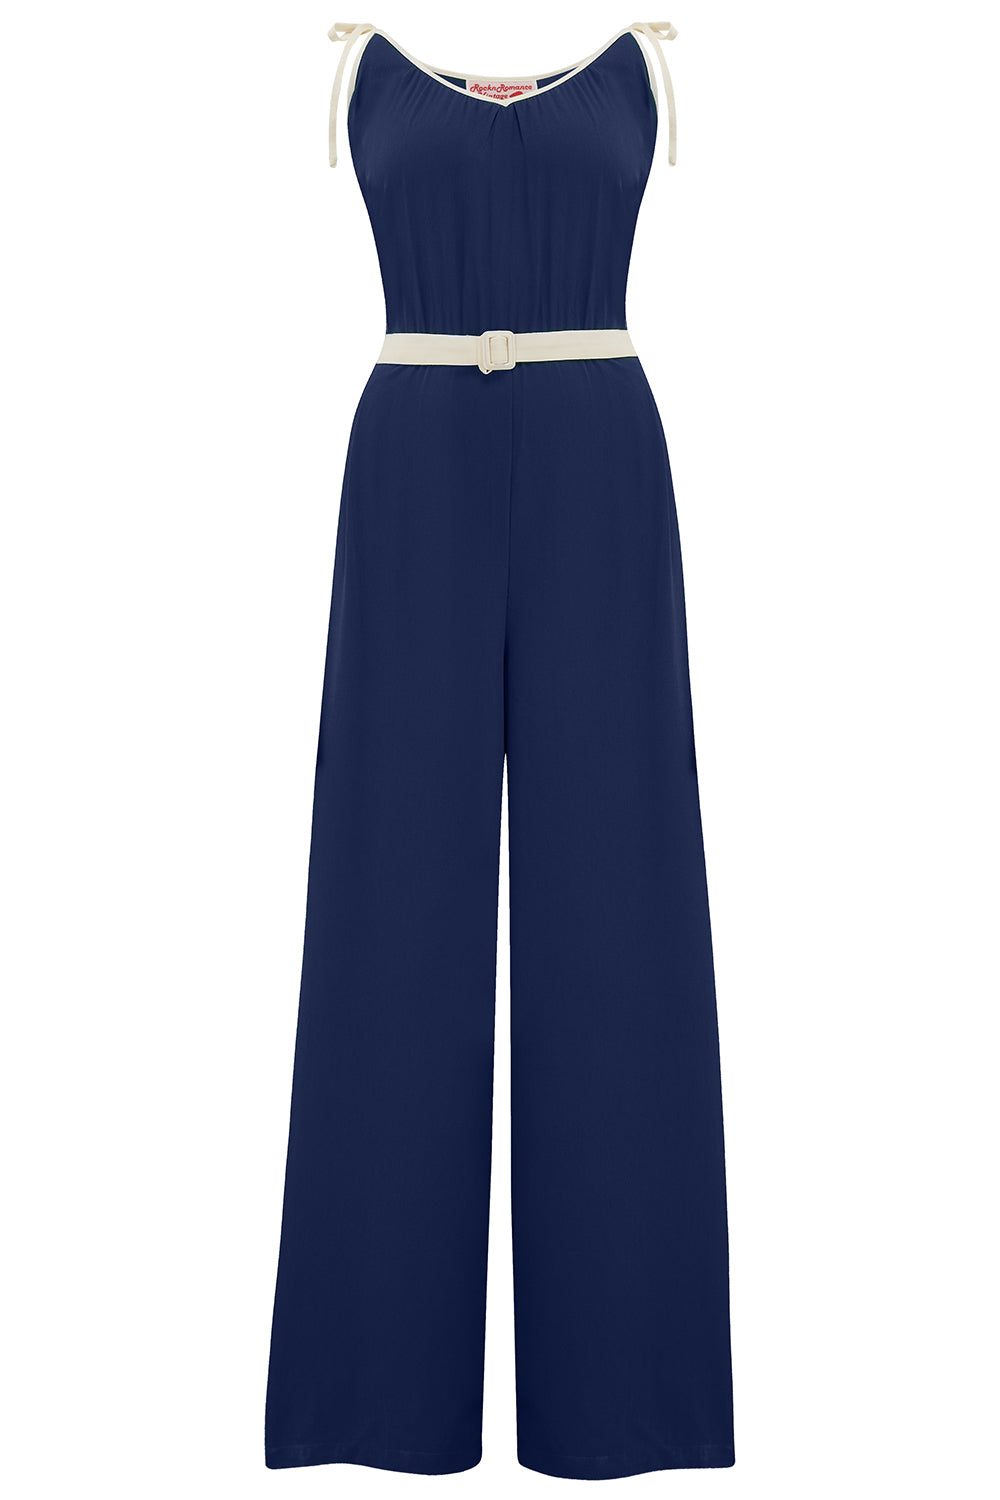 Sailor Dresses, Nautical Theme Dress, WW2 Dresses The Marcie Jump Suit in Navy Blue With Ivory Contrasts True  Authentic 1950s Vintage Style £49.00 AT vintagedancer.com